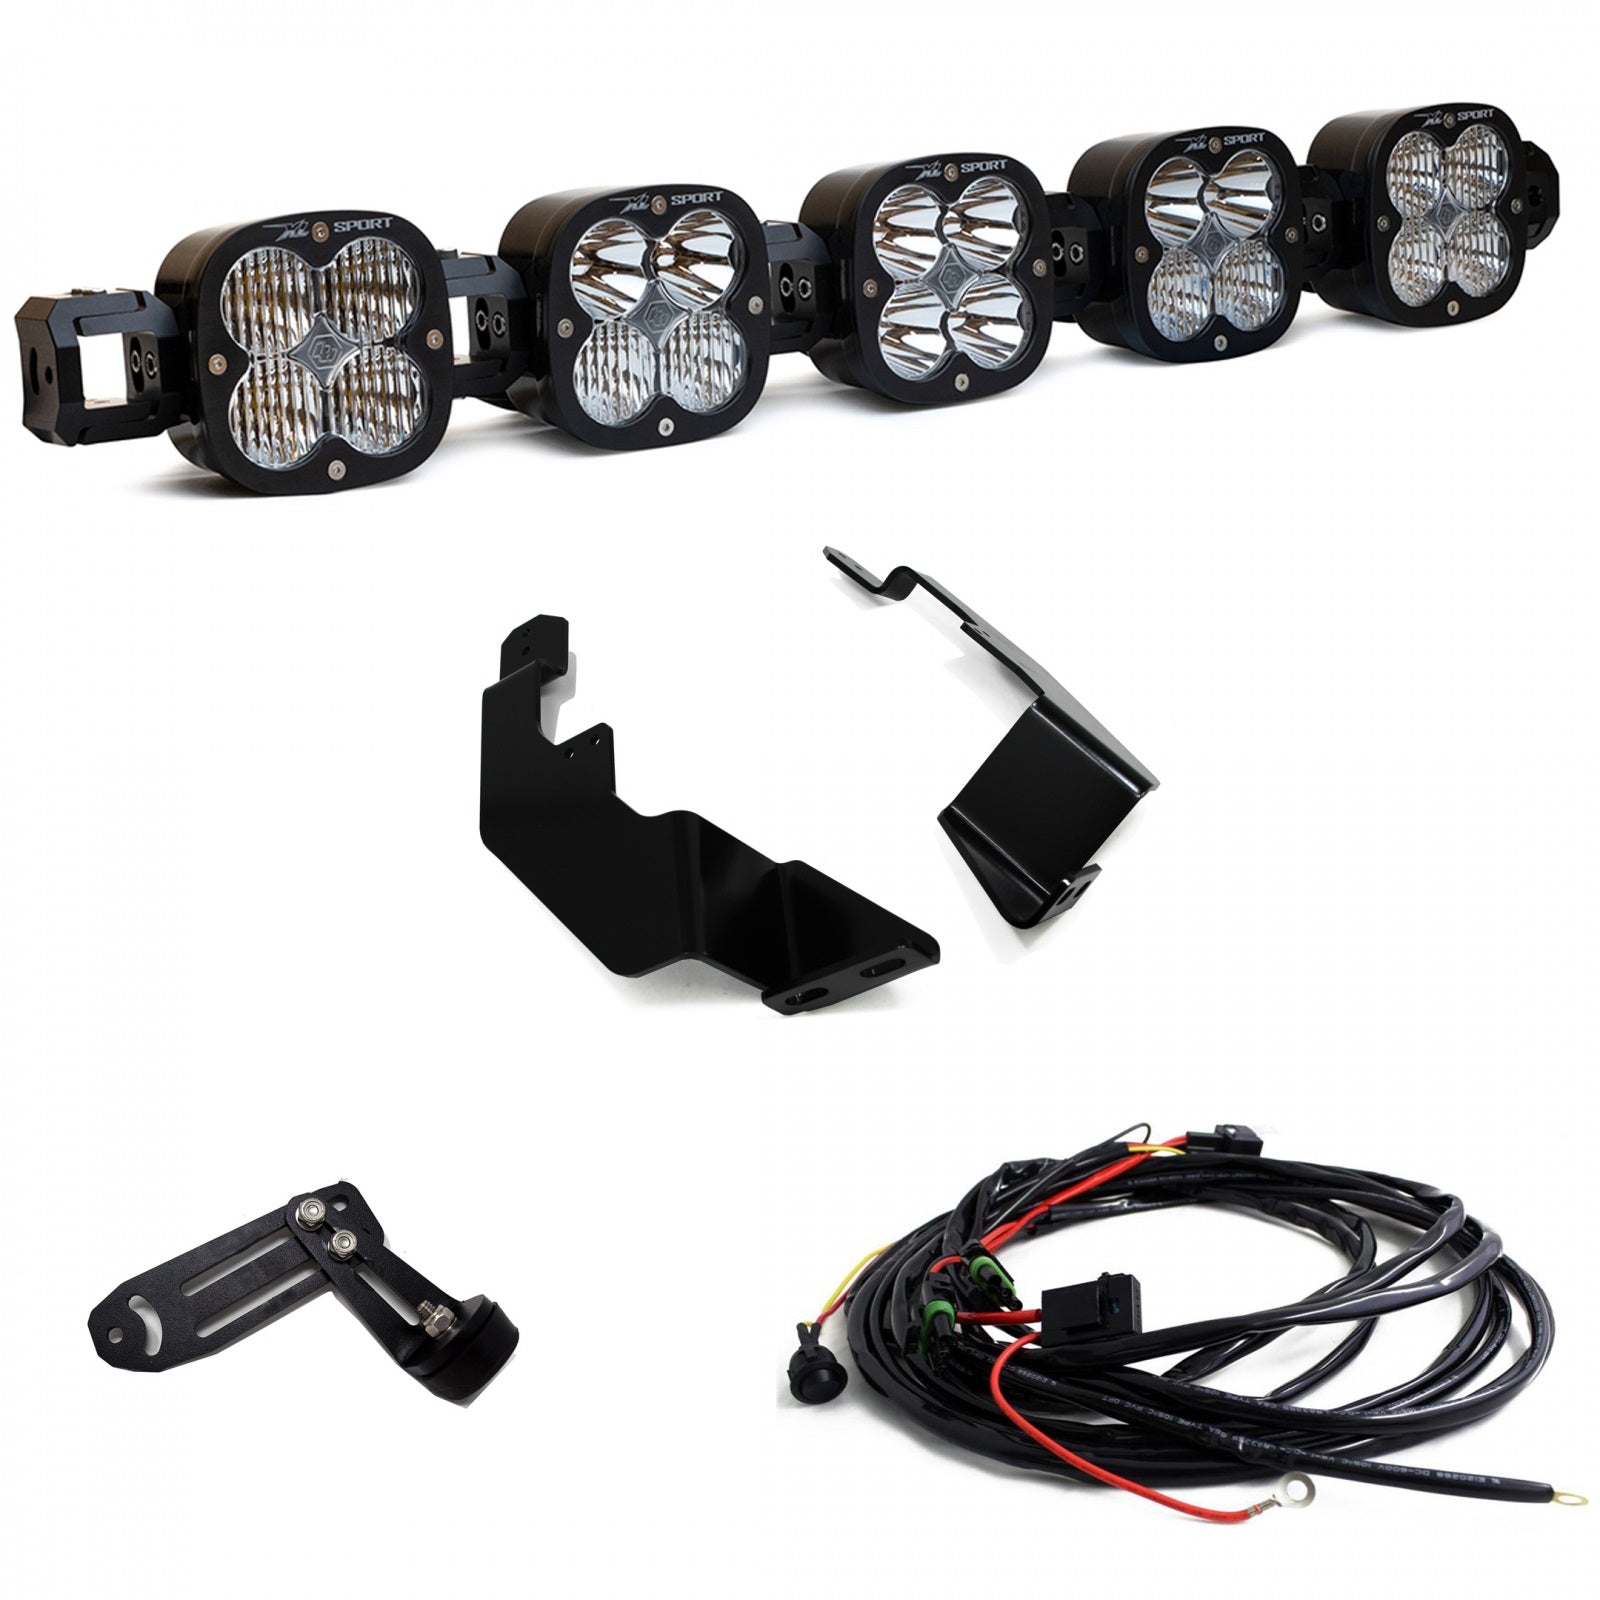 All components of Baja Designs Toyota XL Linkable Bumper Light Kit - Toyota 2016-21 Tacoma